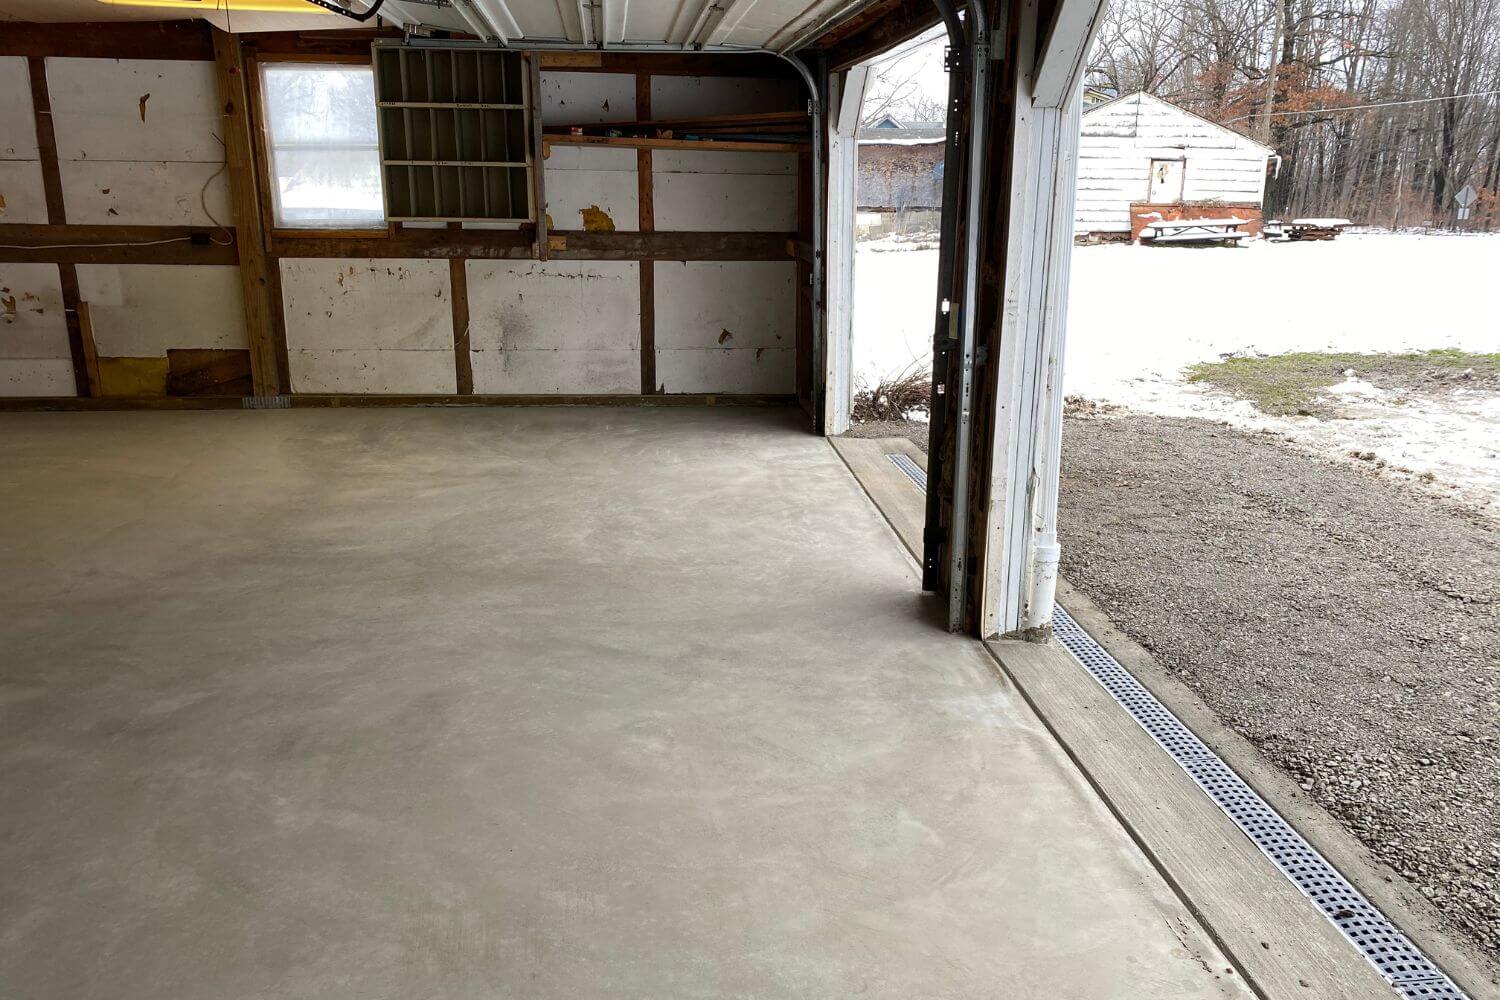 new concrete floor in a residential garage, with new exterior french drainage installed to assist with water drainage issues